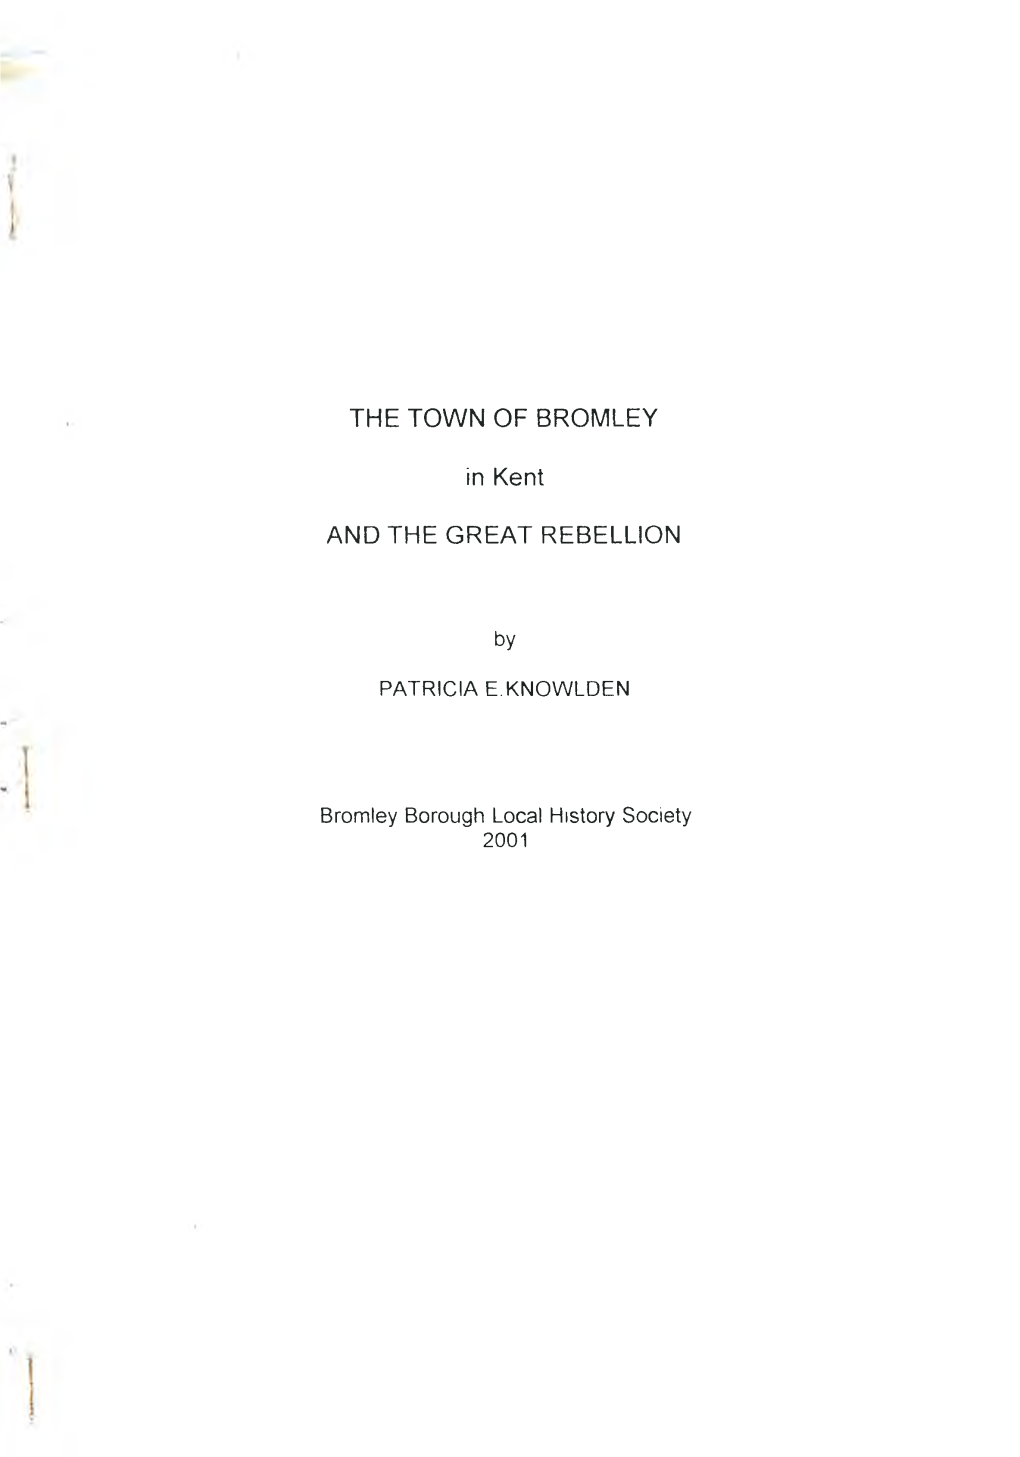 THE TOWN of BROMLEY in Ke Nt and the GREAT REBELLION